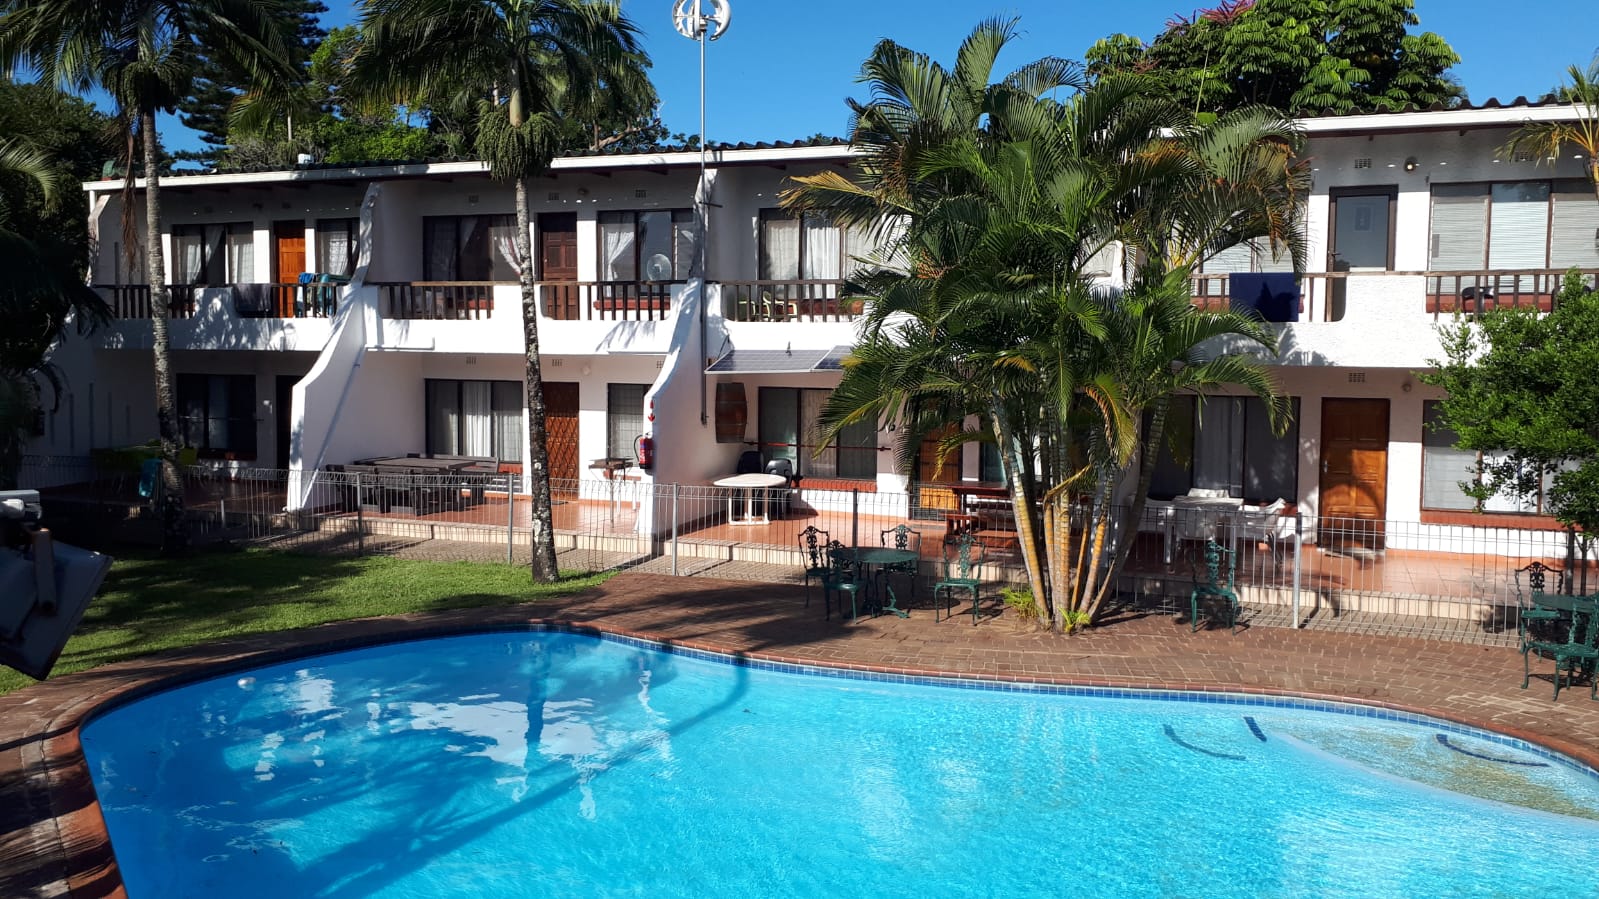 Villa Mia self catering holiday flats st lucia natal north coast south africa